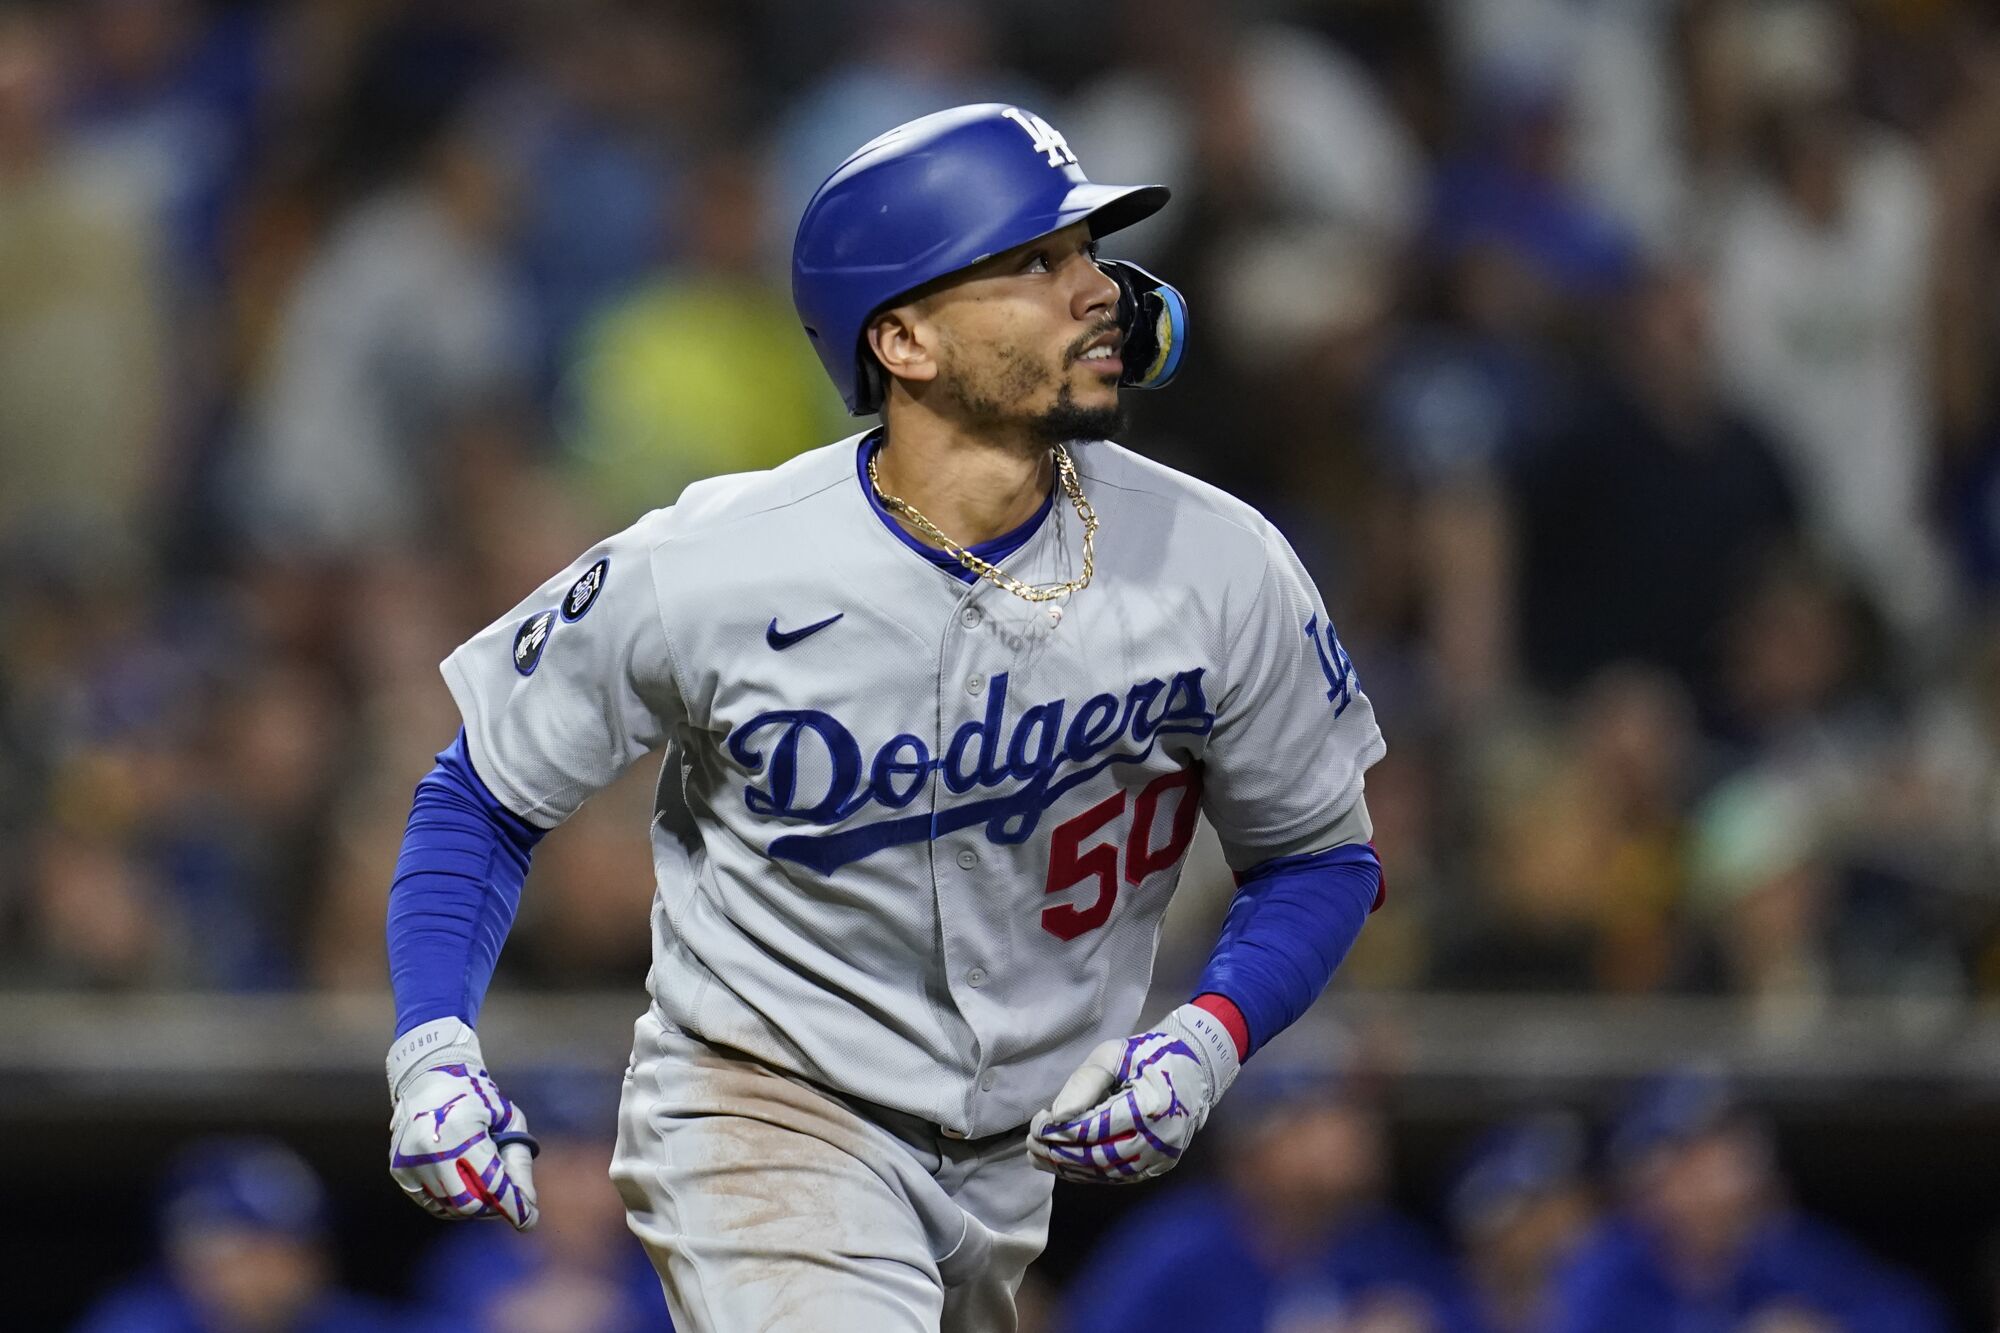 Dodgers right fielder Mookie Betts flies out during Game 4 of the National League Division Series.